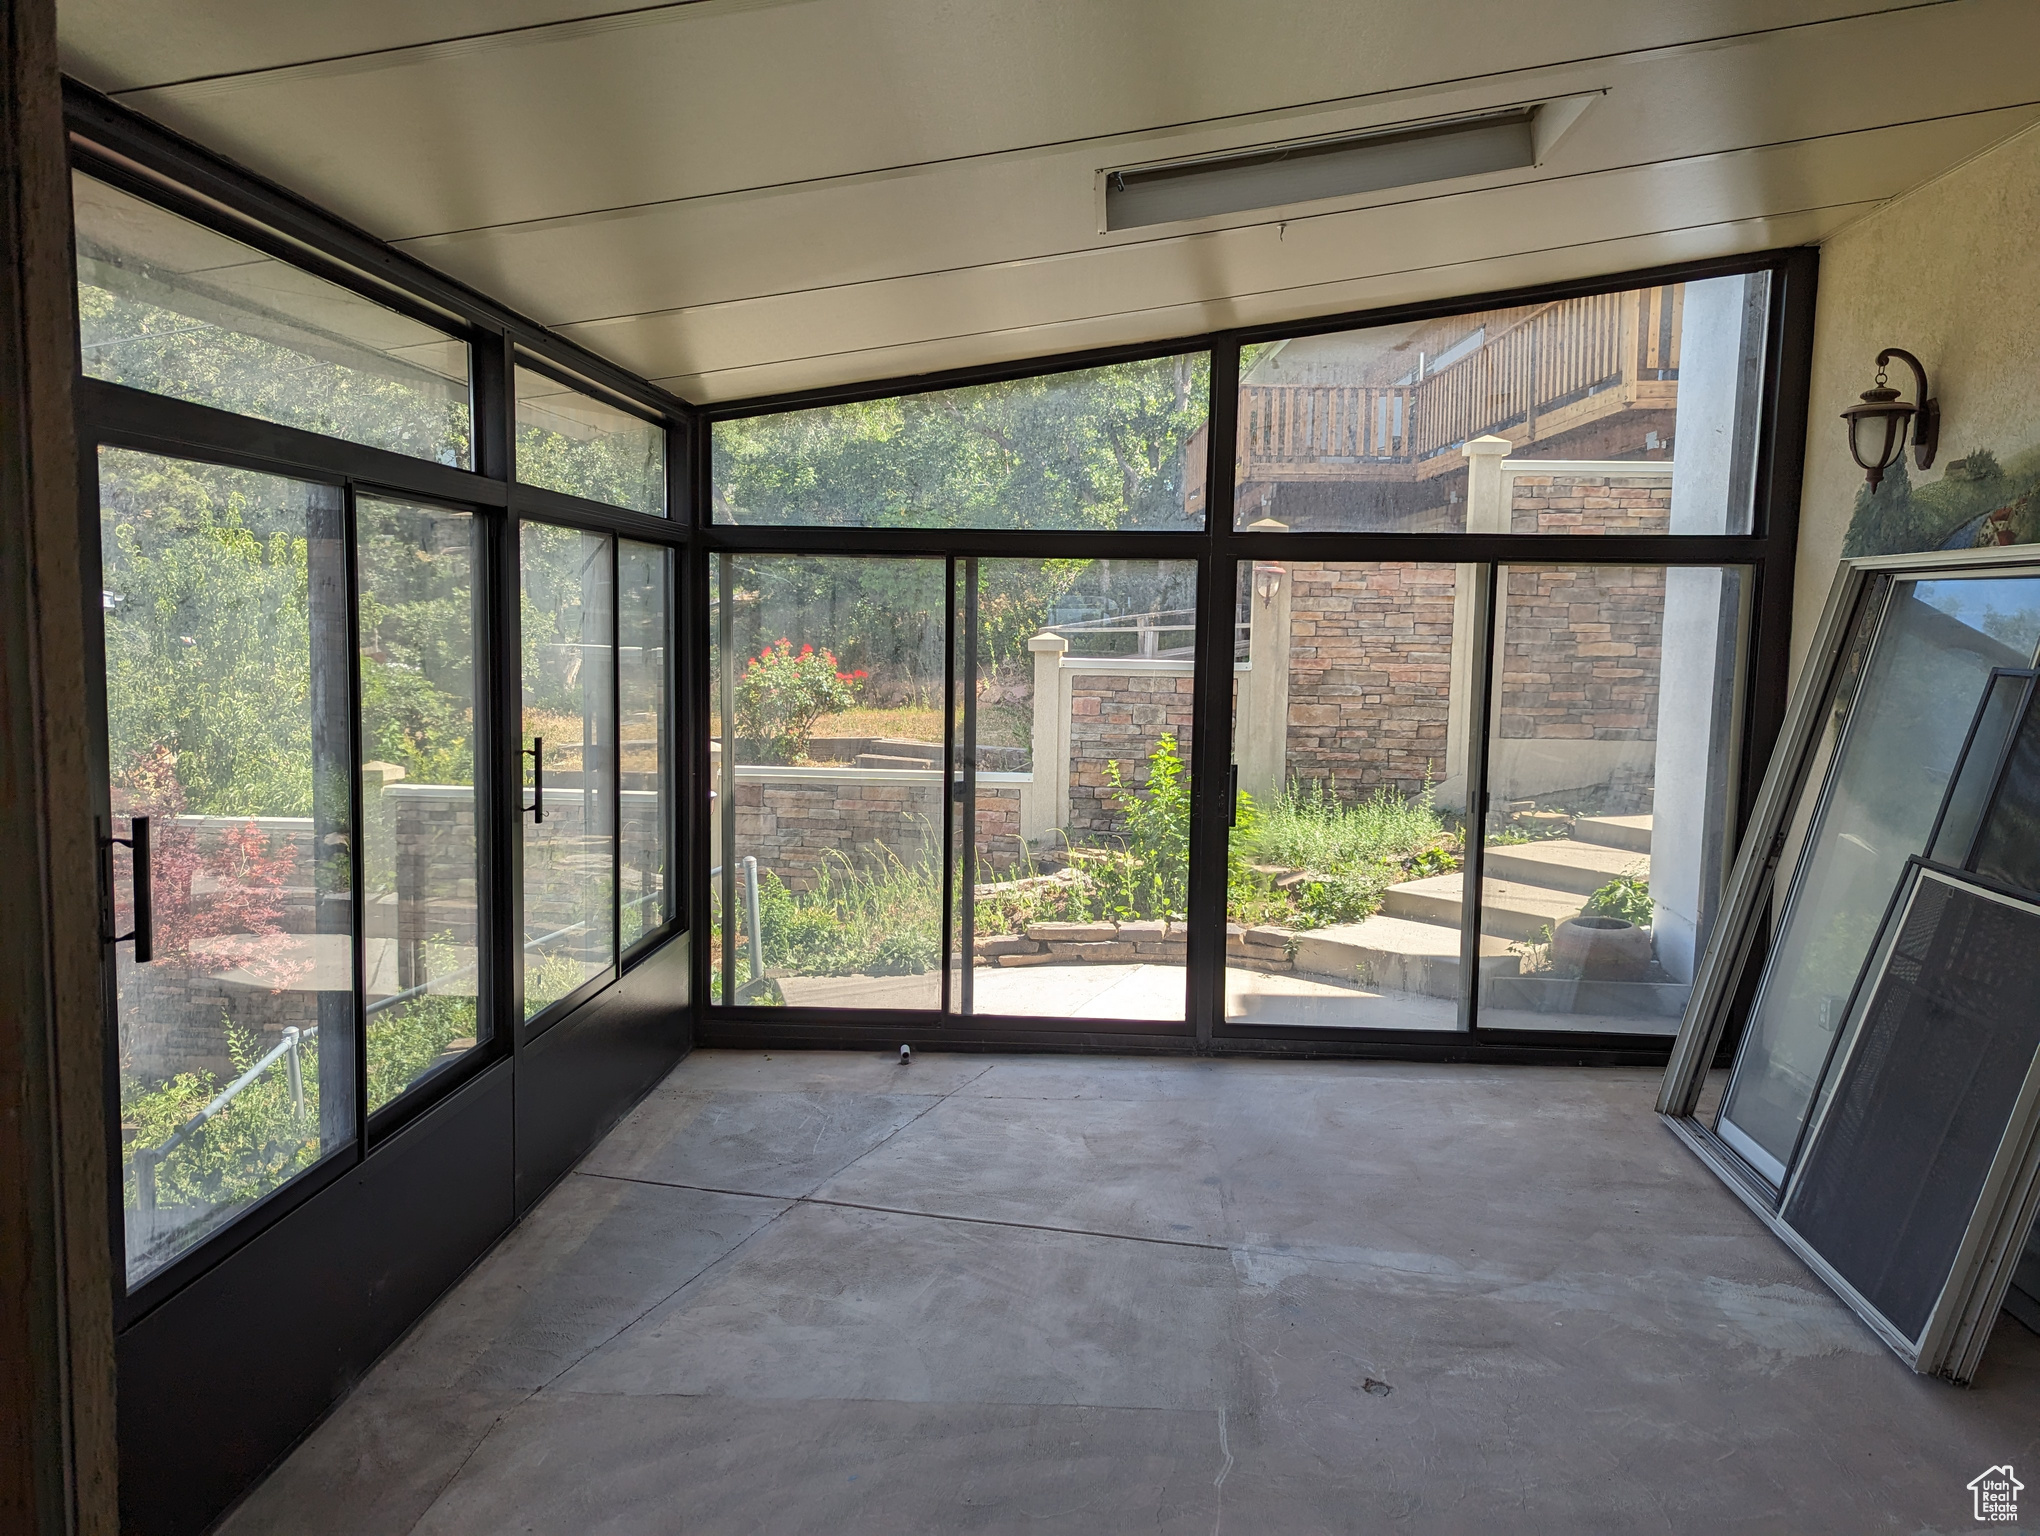 Unfurnished sunroom with a healthy amount of sunlight